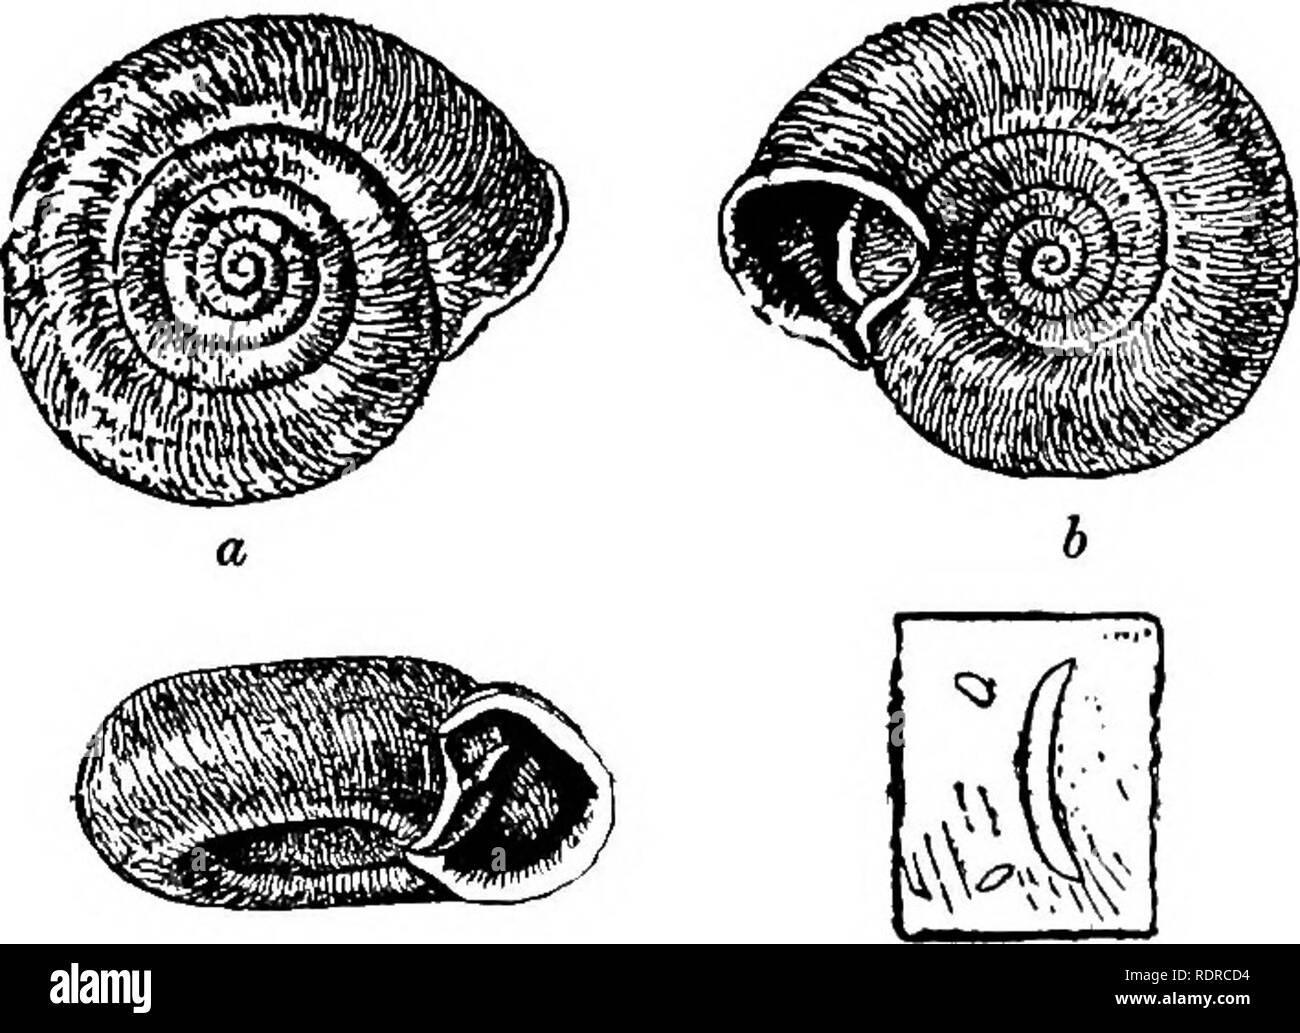 . Mollusca ... Mollusks. 116 helicid;e. Original descnption:—&quot; Shell dextra], discoid, widely umbili- cated, rufous brown, coarsely and regularly ribbed, with scarcely visible microscopic sculpture above, but strongly decussated with spiral lines below, suture impressed. Whorls 6, convex, slowly increasing, the last rapidly widening towards the aperture, not angulated above, shortly descending in front. Aperture sub- triangular ; peristome light brown, a little thickened and reflexed, the margins converging; parietal callus with a strongly raised flexuous ridge, separated from both margin Stock Photo